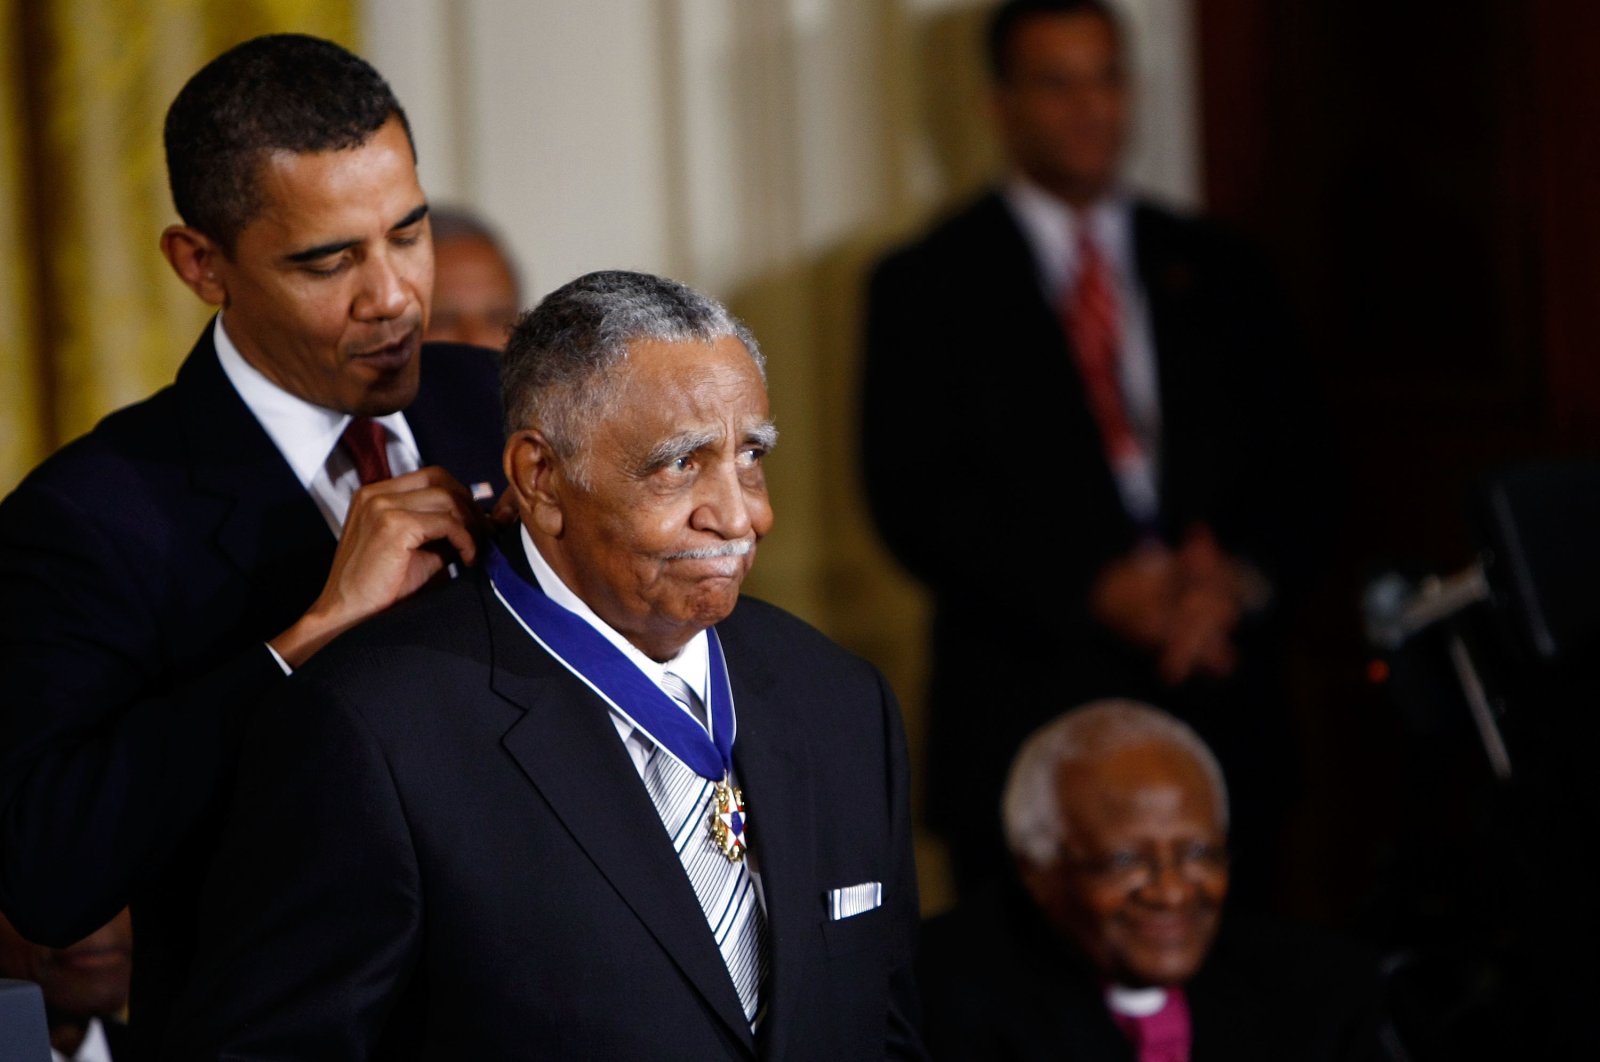 In this file photo U.S. President Barack Obama presents the Medal of Freedom to Reverend Joseph E. Lowery during a ceremony at the White House in Washington, DC. on Aug. 12, 2009. (AFP Photo)